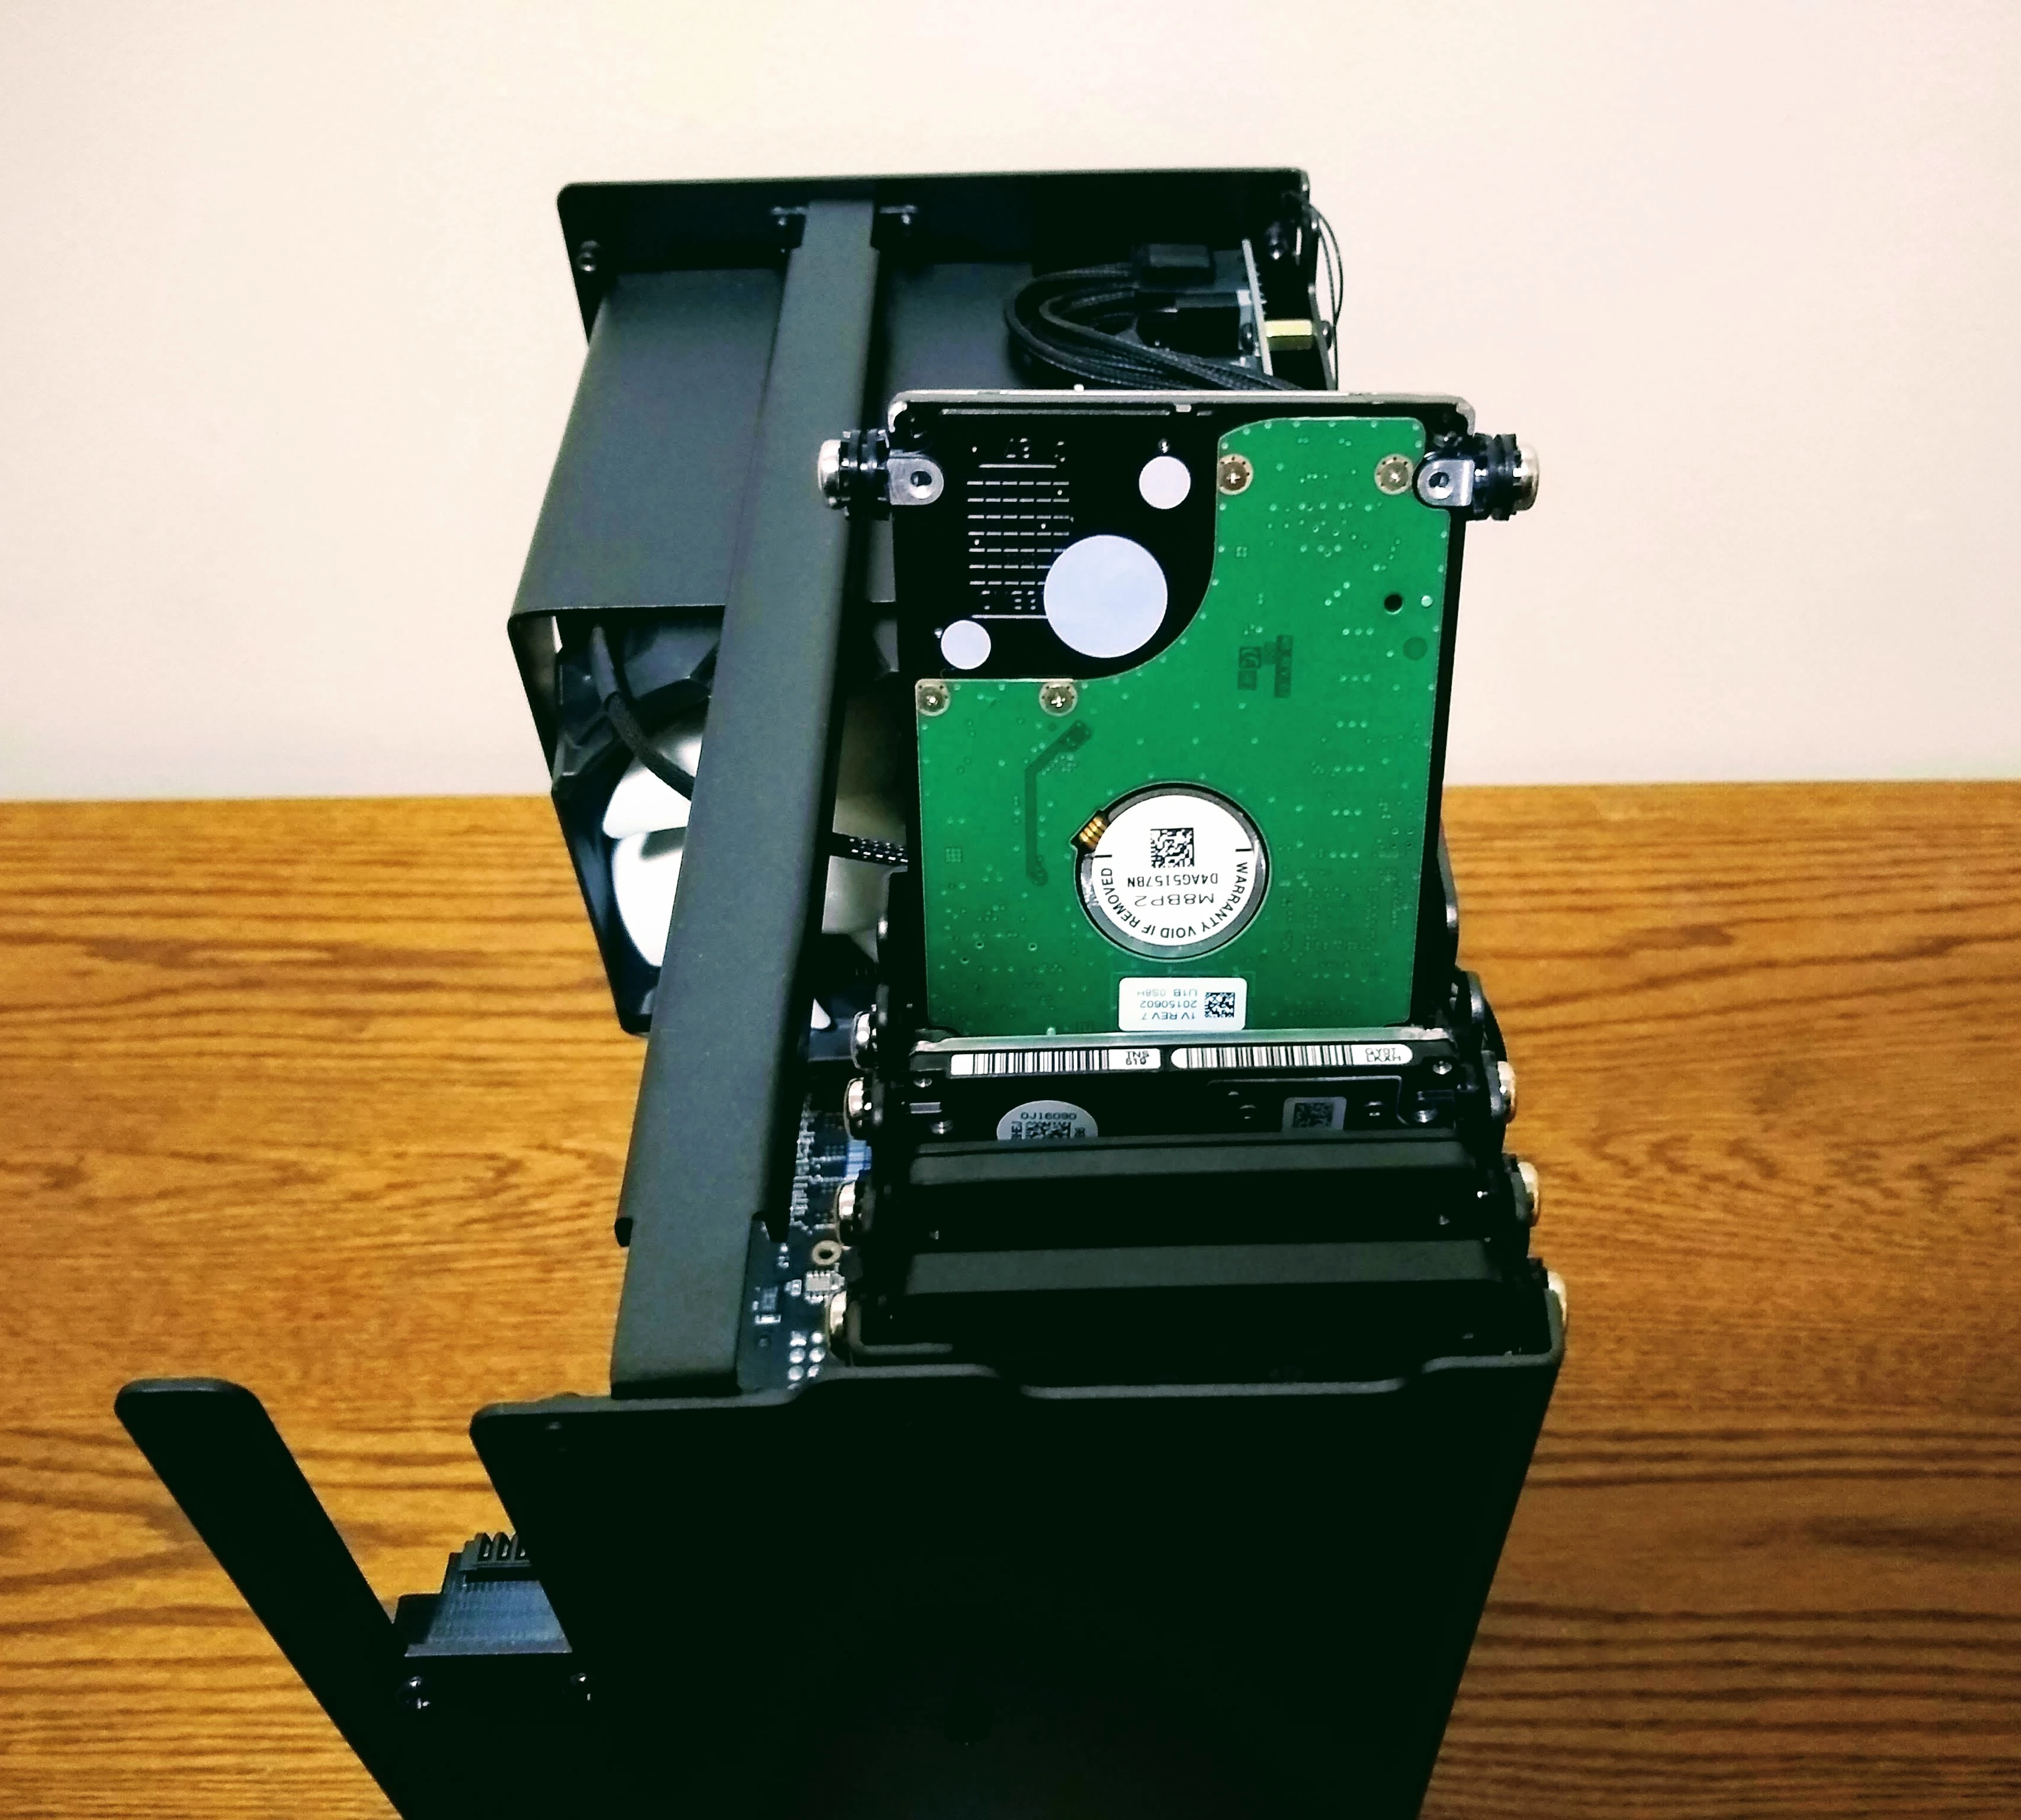 The drive cage of my Thelio with one drive out of its slot.